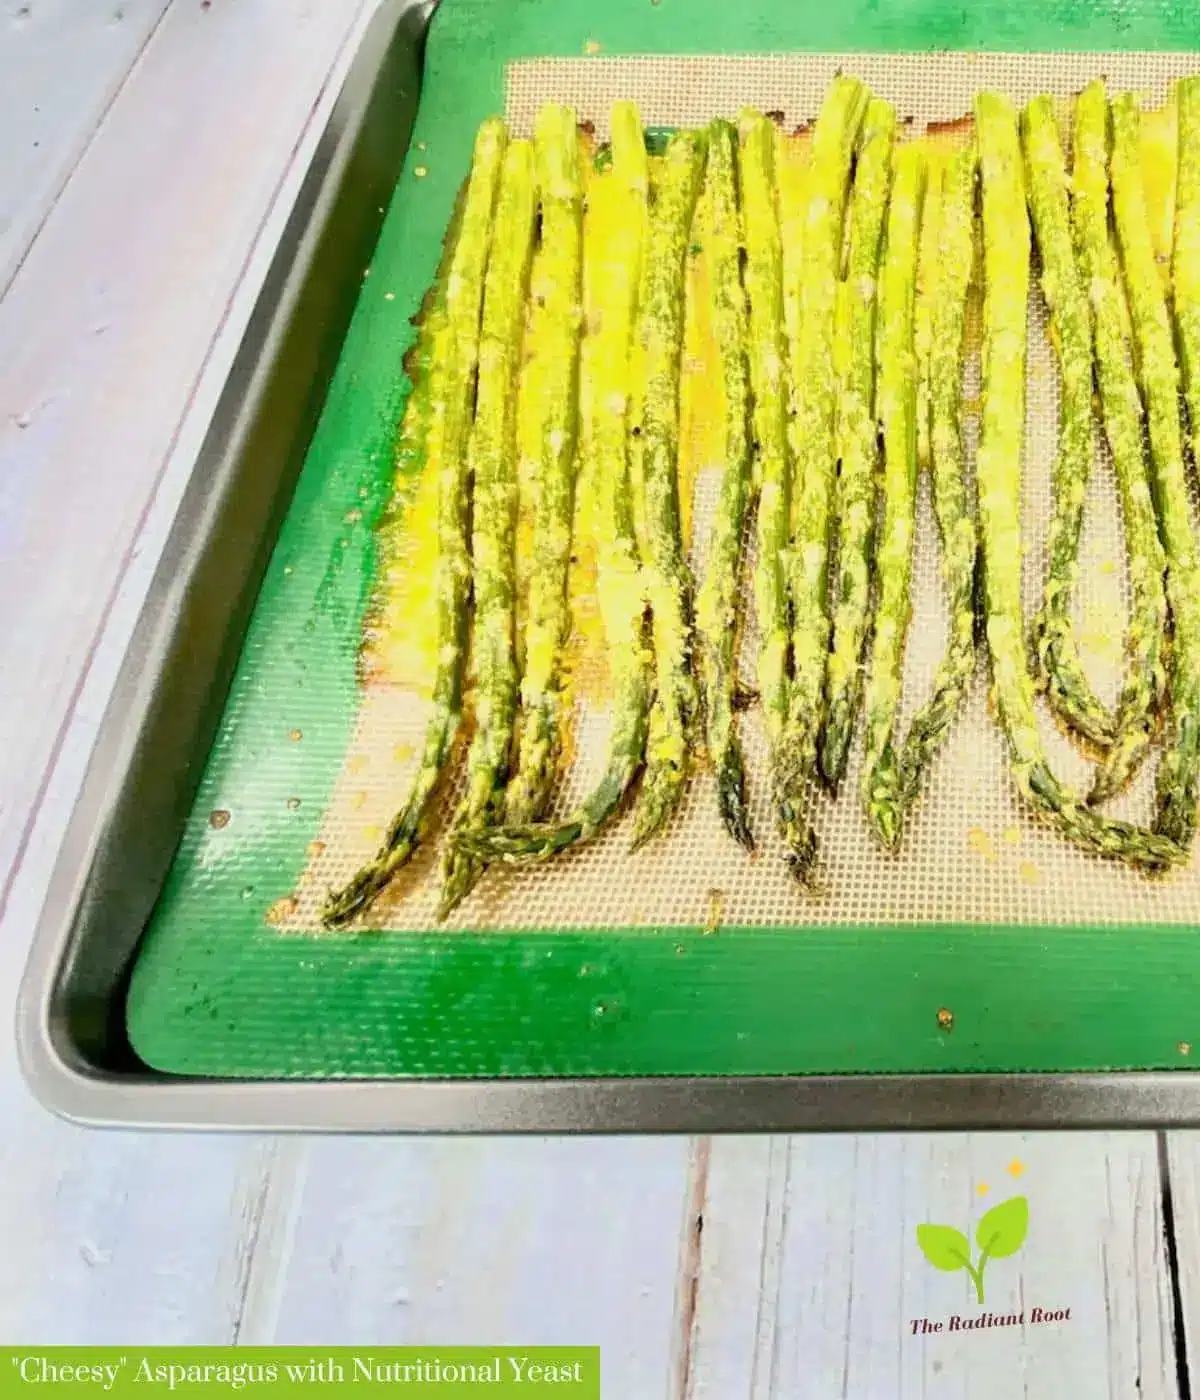 A white wooden table with a baking sheet on top of it. Inside the baking sheet is a green mat and on top of that is roasted asparagus with nutritional yeast “cheese” sauce consisting of nutritional yeast, olive oil, and water. It reads “ ‘Cheesy’ Asparagus with Nutritional Yeast.” | baked asparagus with “cheese”| The Radiant Root